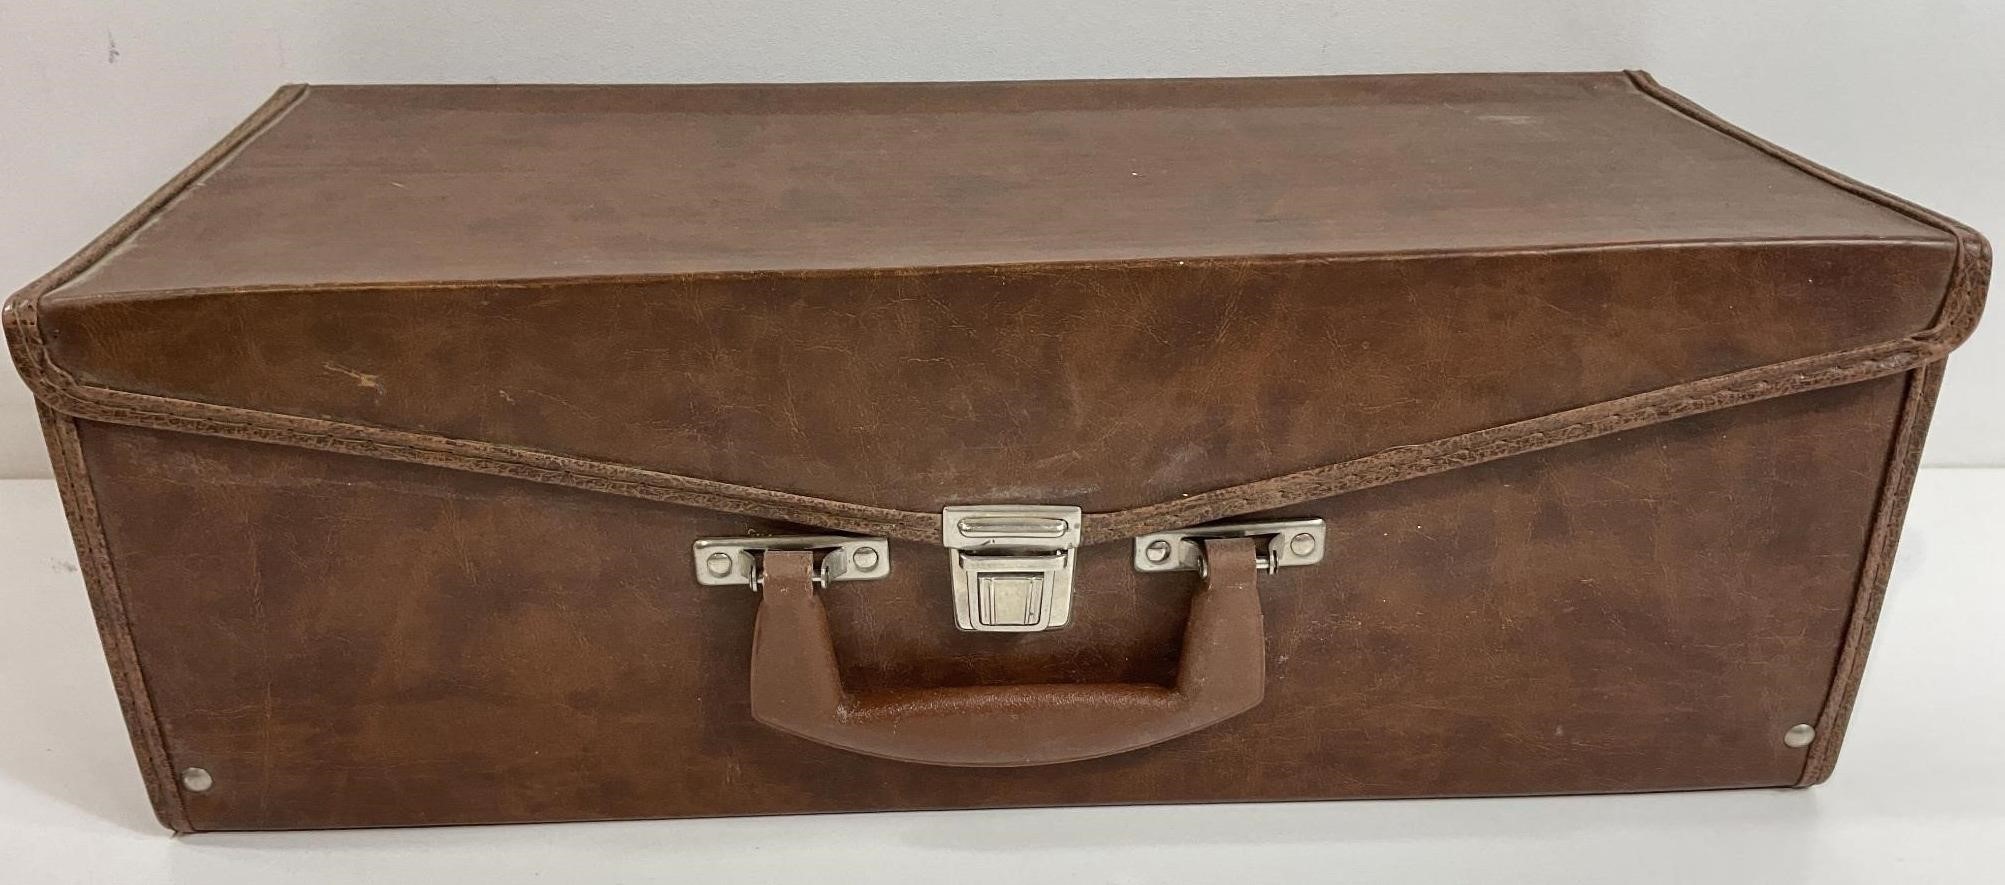 Vintage brown faux leather 8track case with 8track